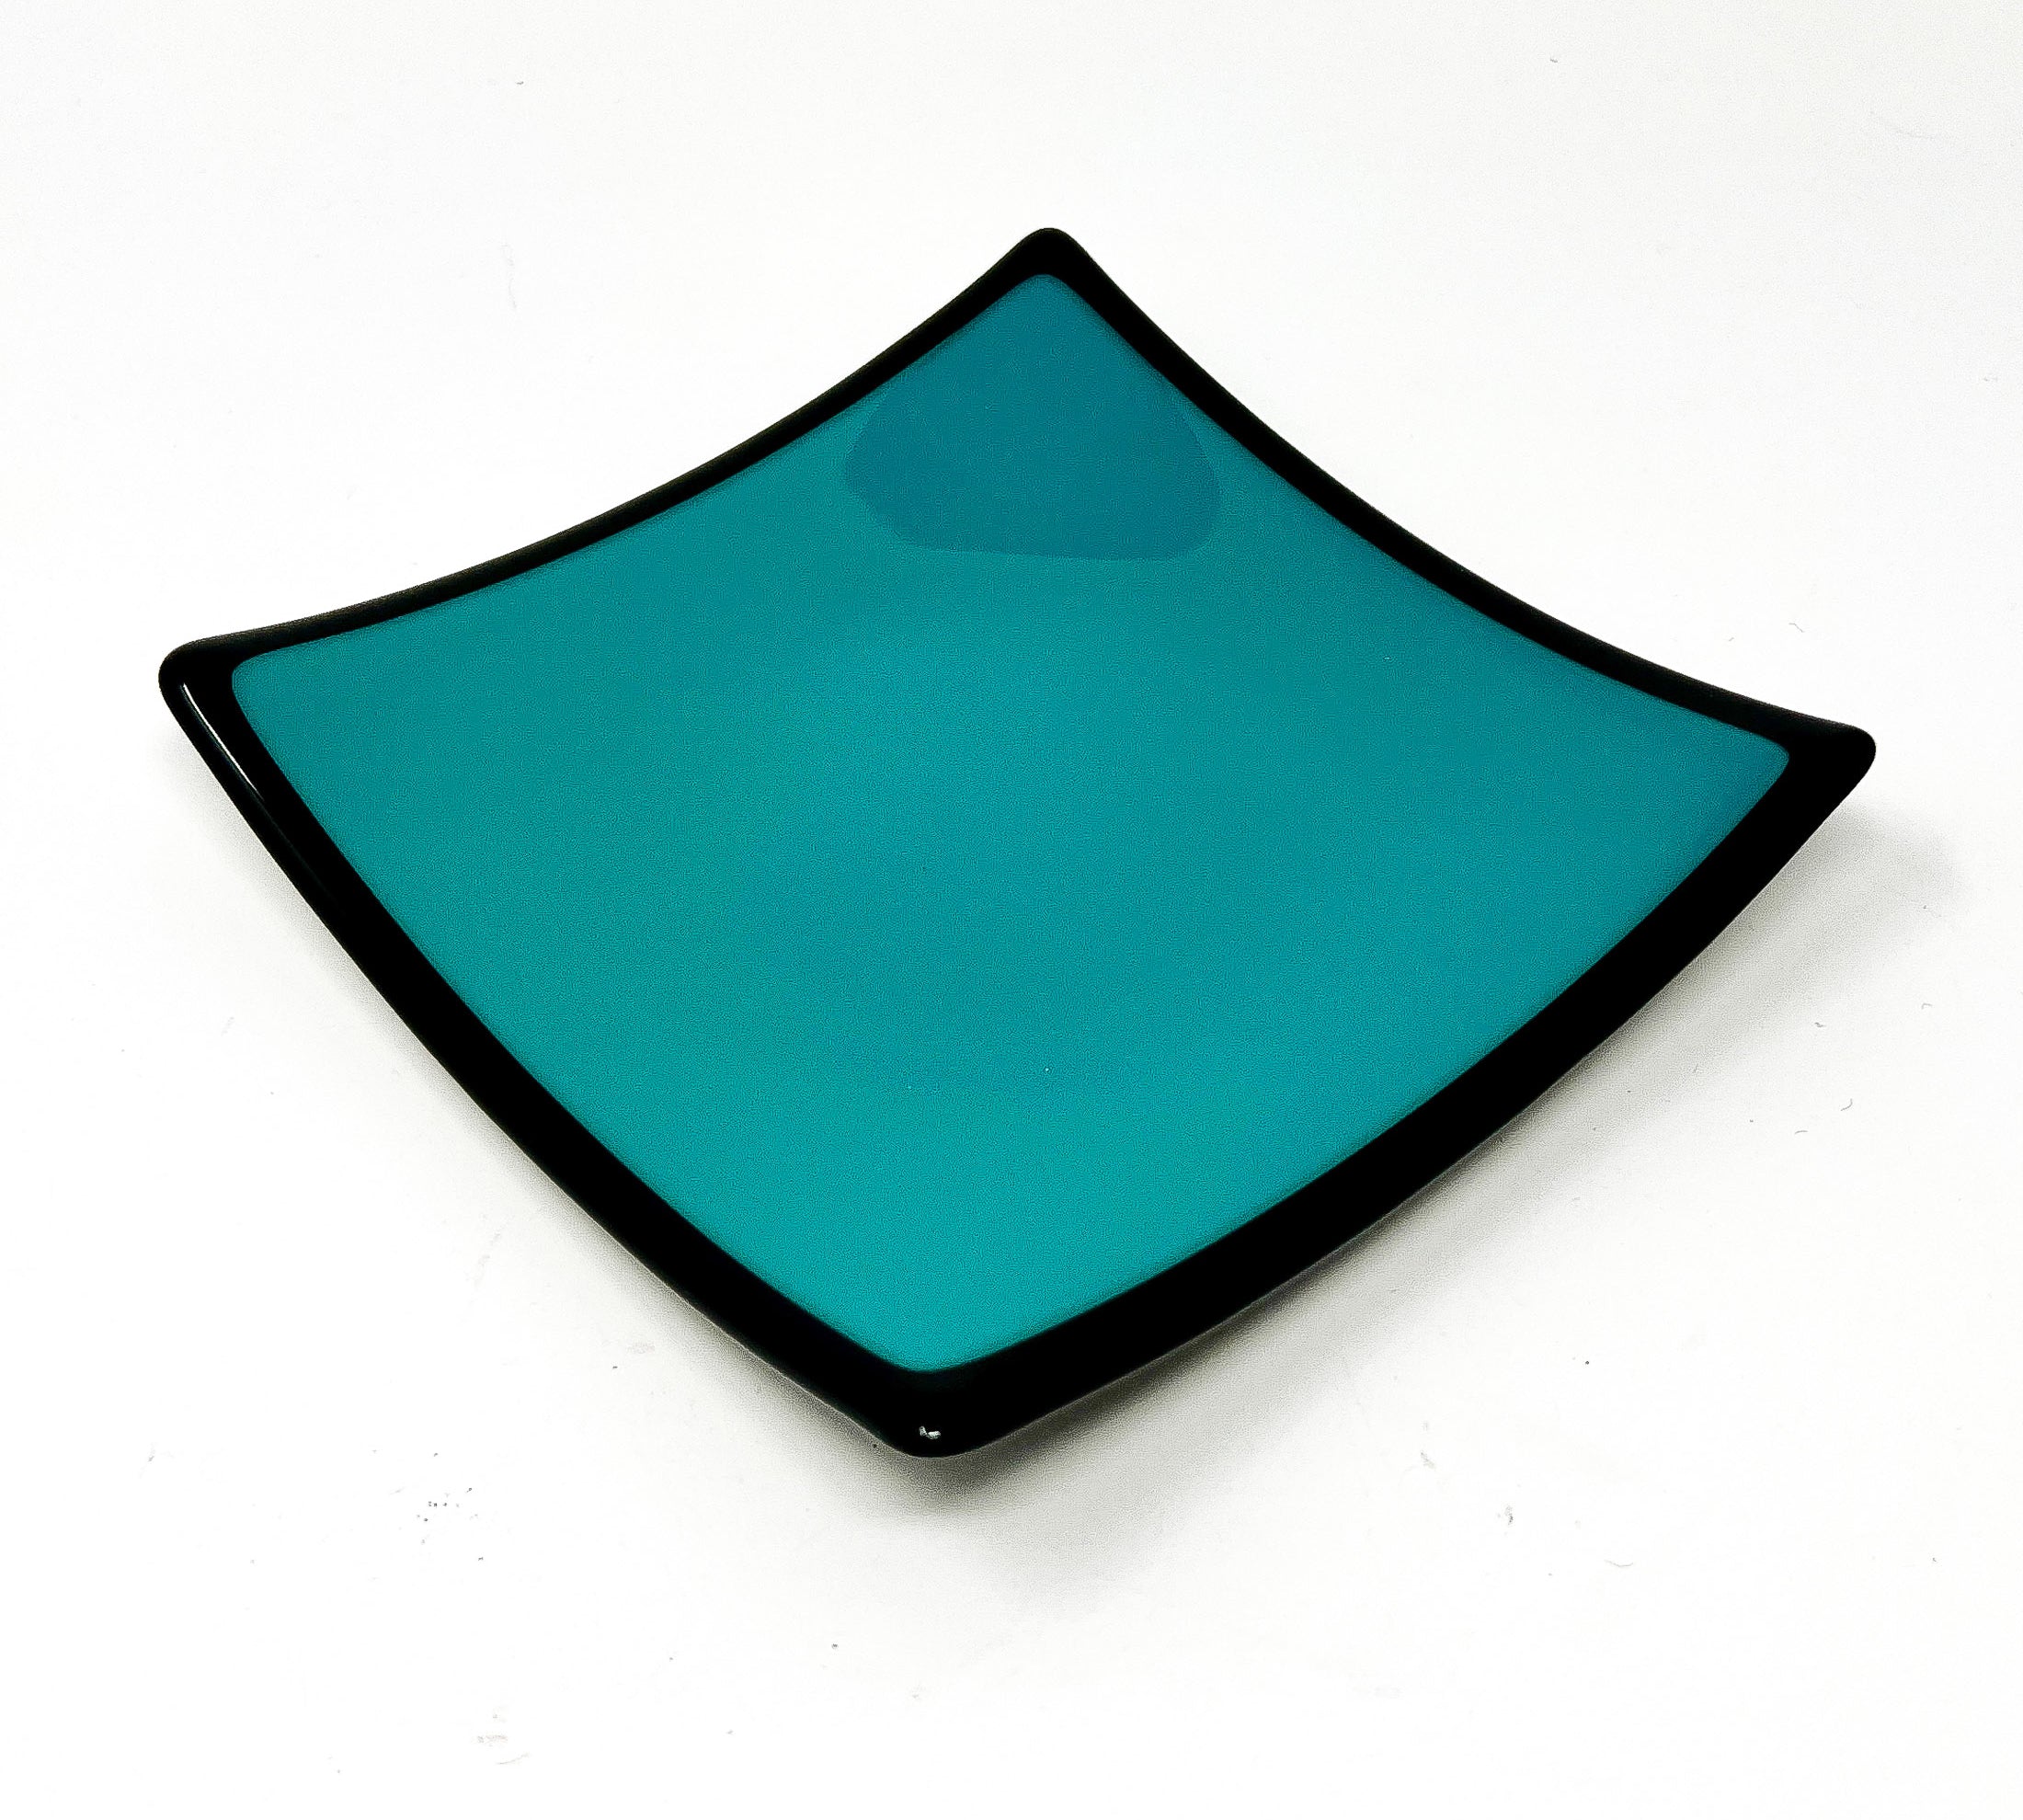 Square glass dish in teal green with black rim in front of white background